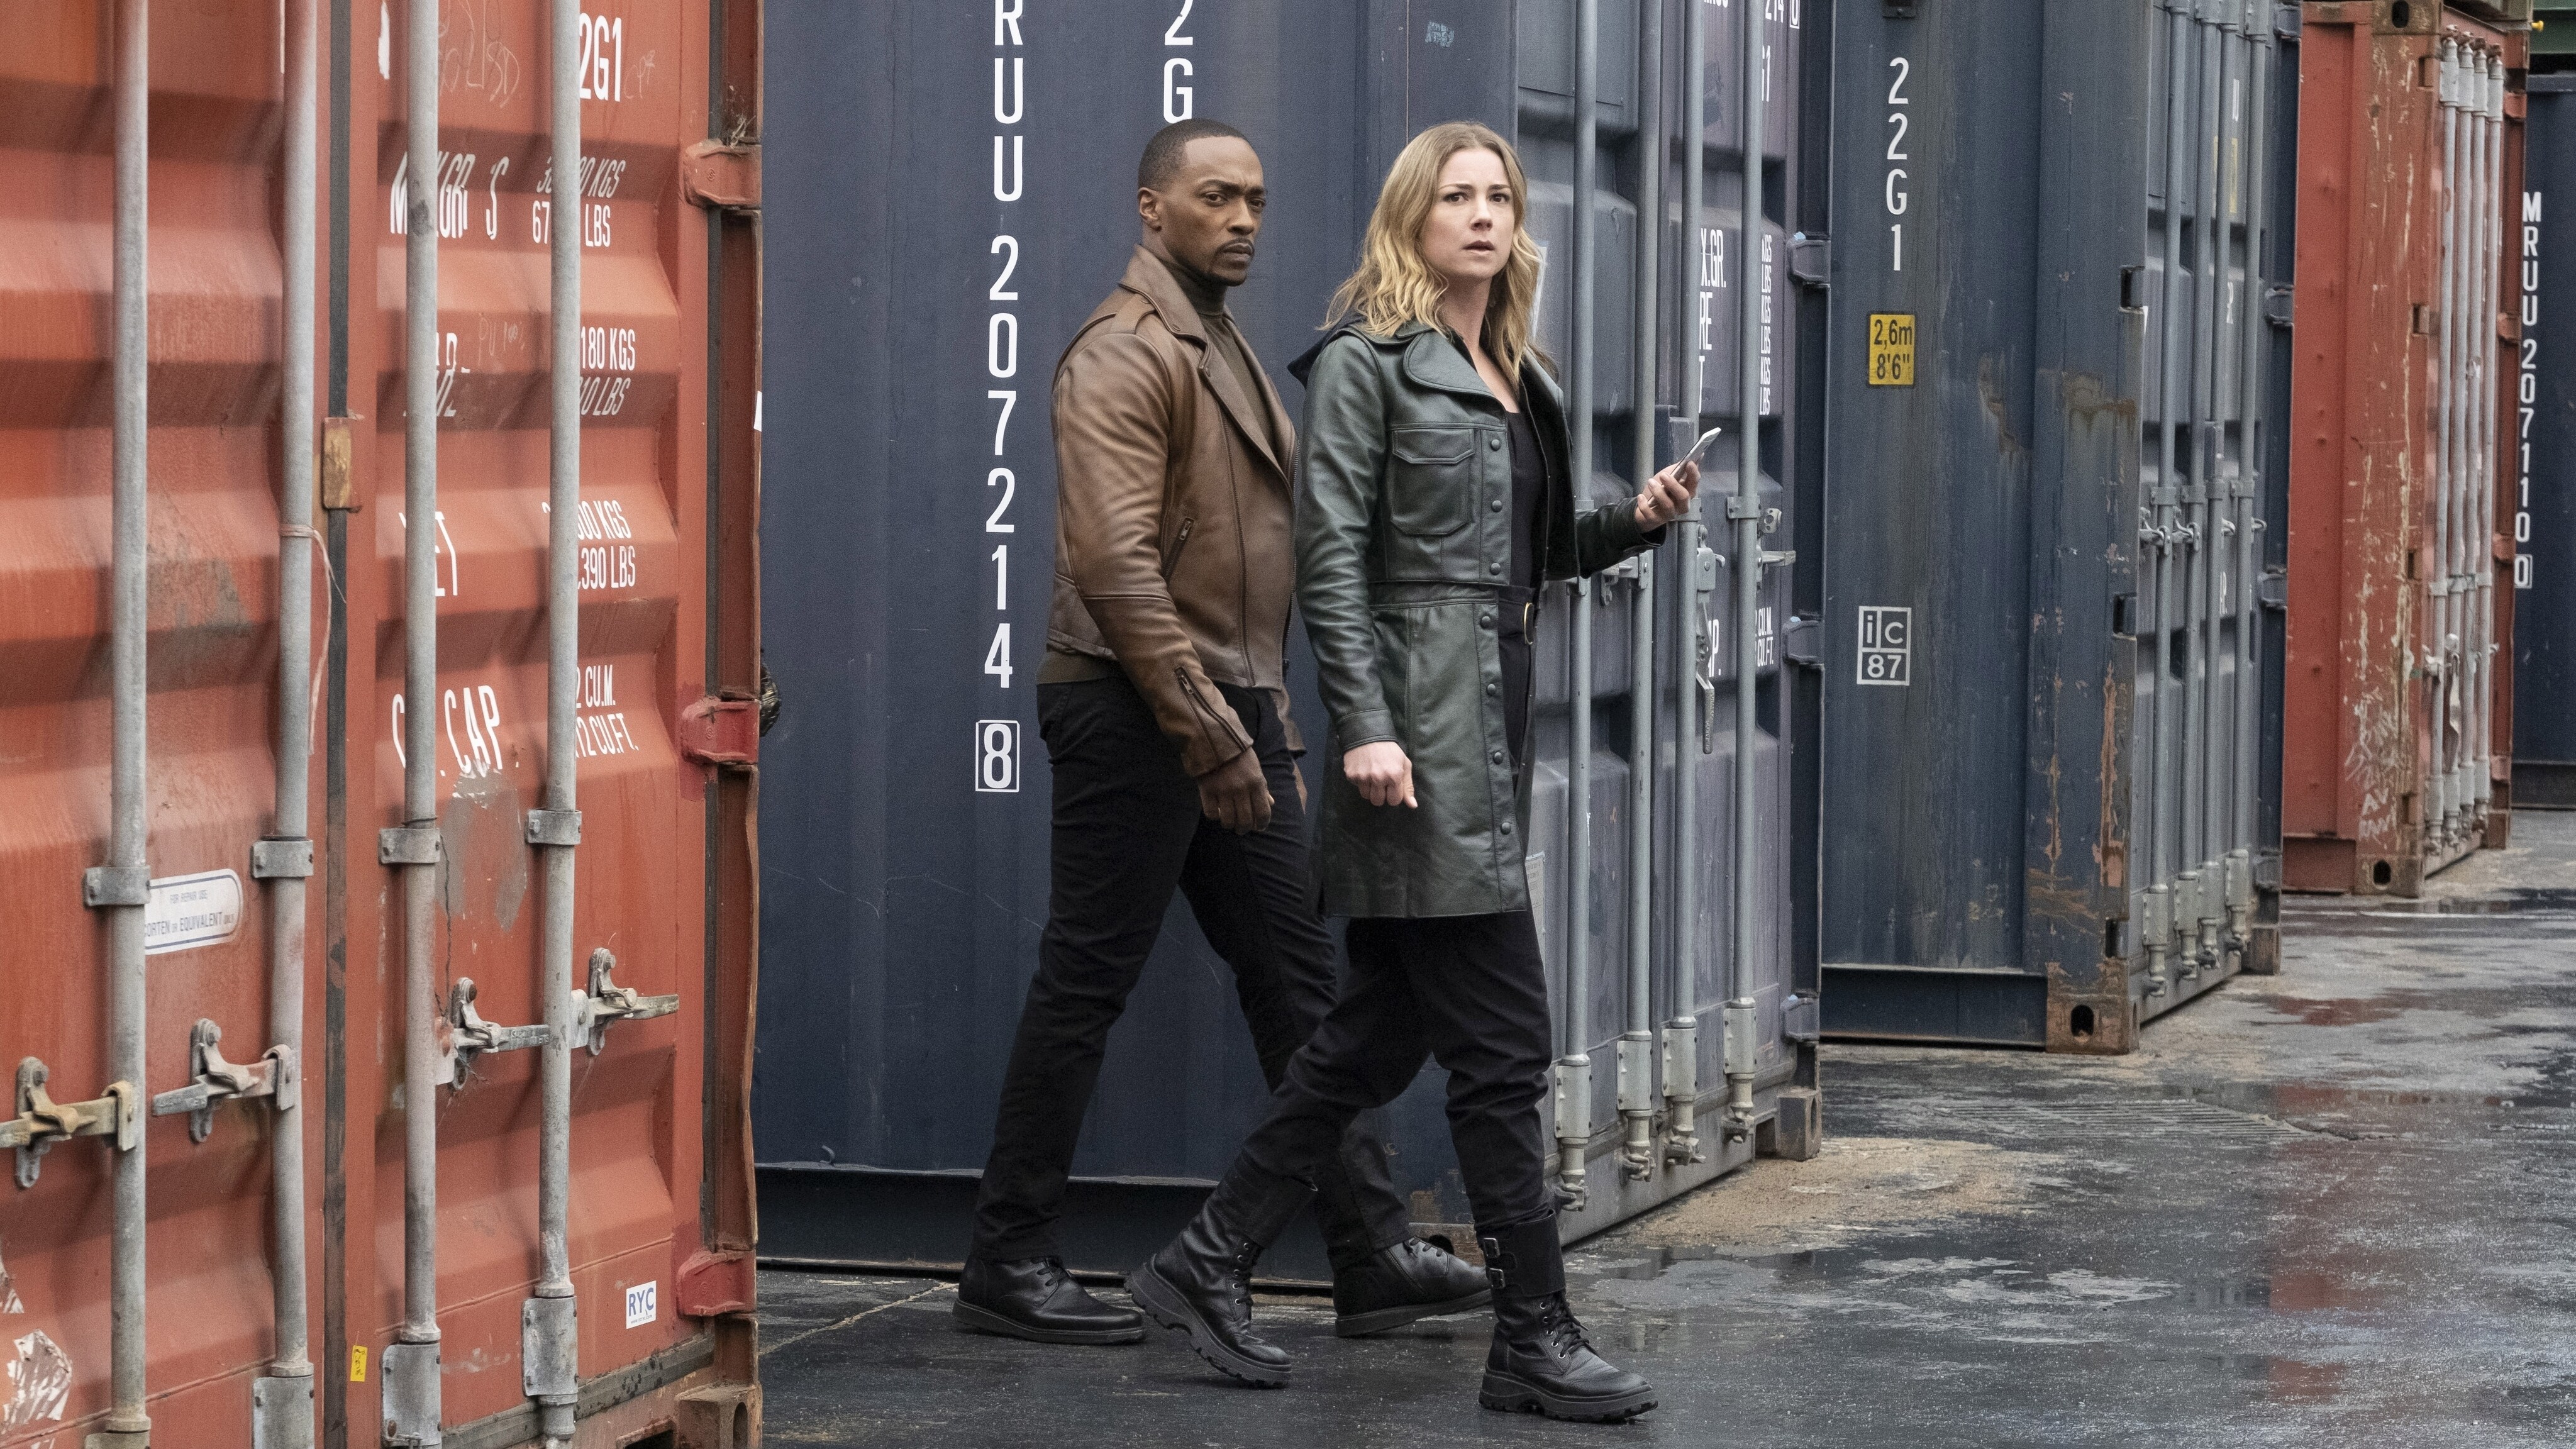 (L-R): Falcon/Sam Wilson (Anthony Mackie) and Sharon Carter/Agent 13 (Emily VanCamp) in Marvel Studios' THE FALCON AND THE WINTER SOLDIER exclusively on Disney+. Photo by Chuck Zlotnick. ©Marvel Studios 2021. All Rights Reserved.